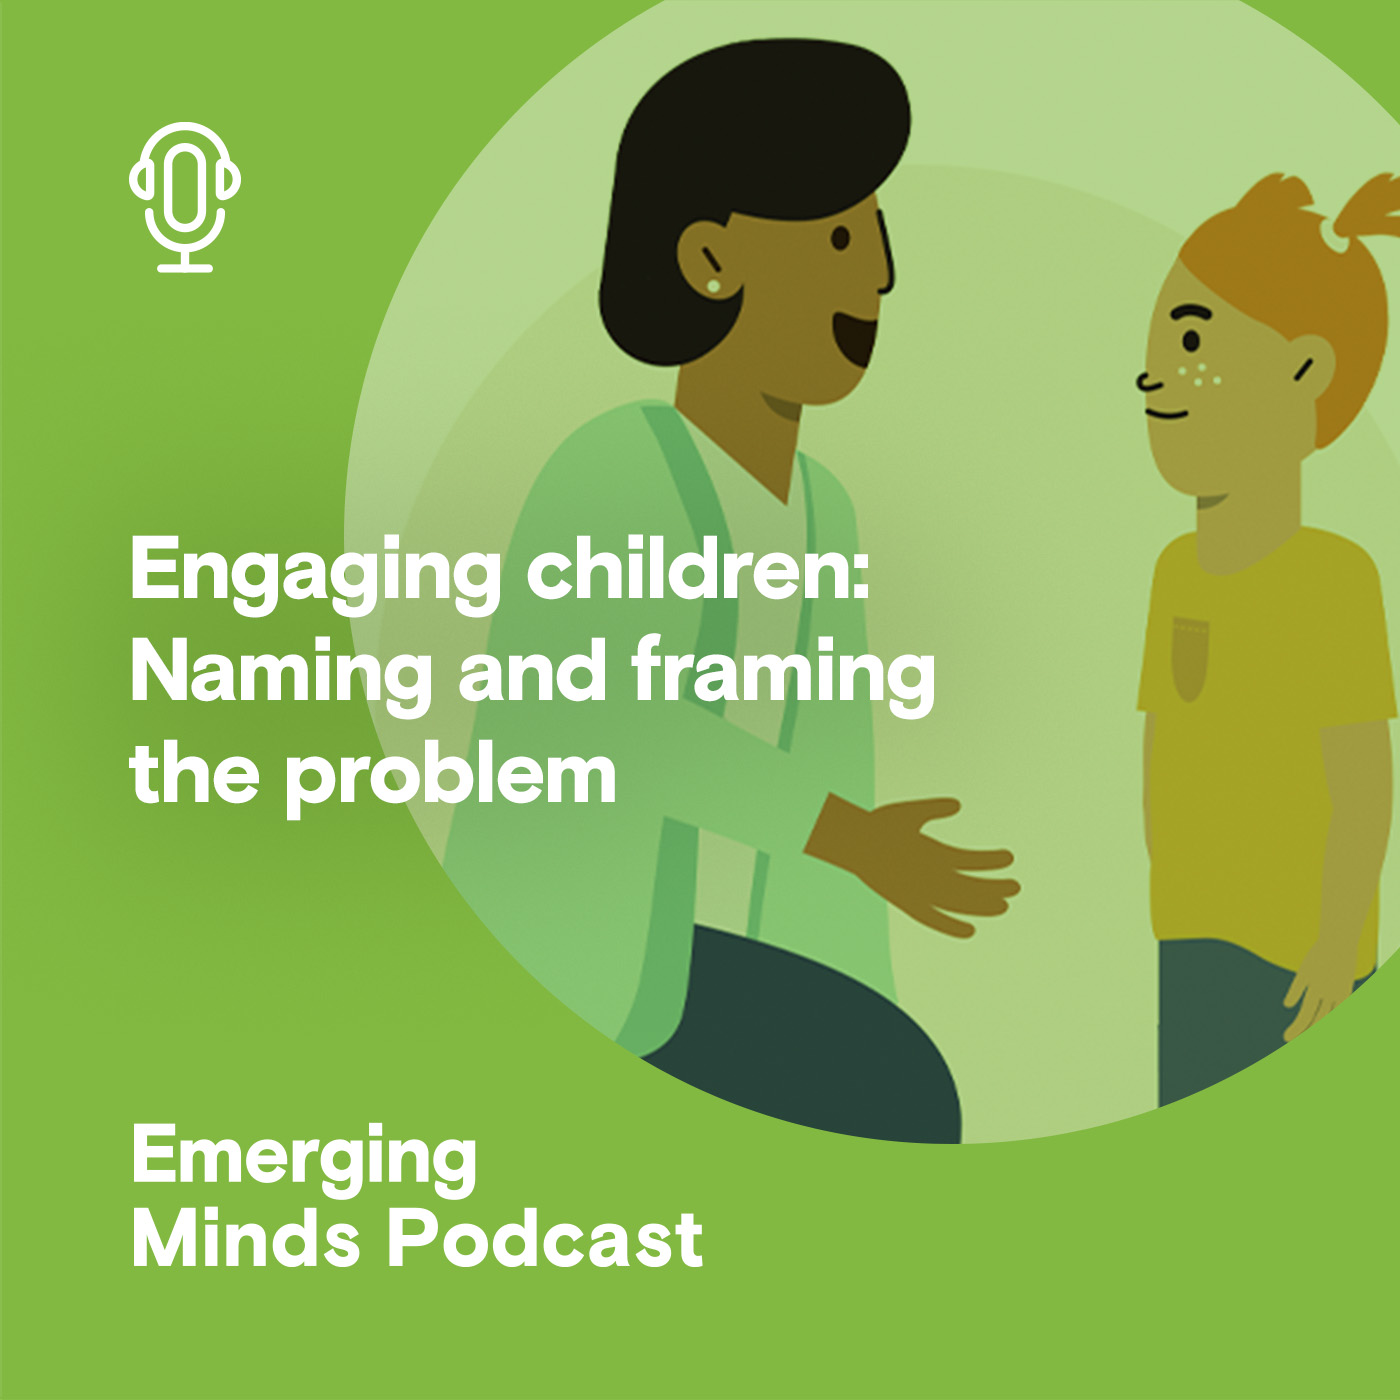 Engaging children: Naming and framing the problem